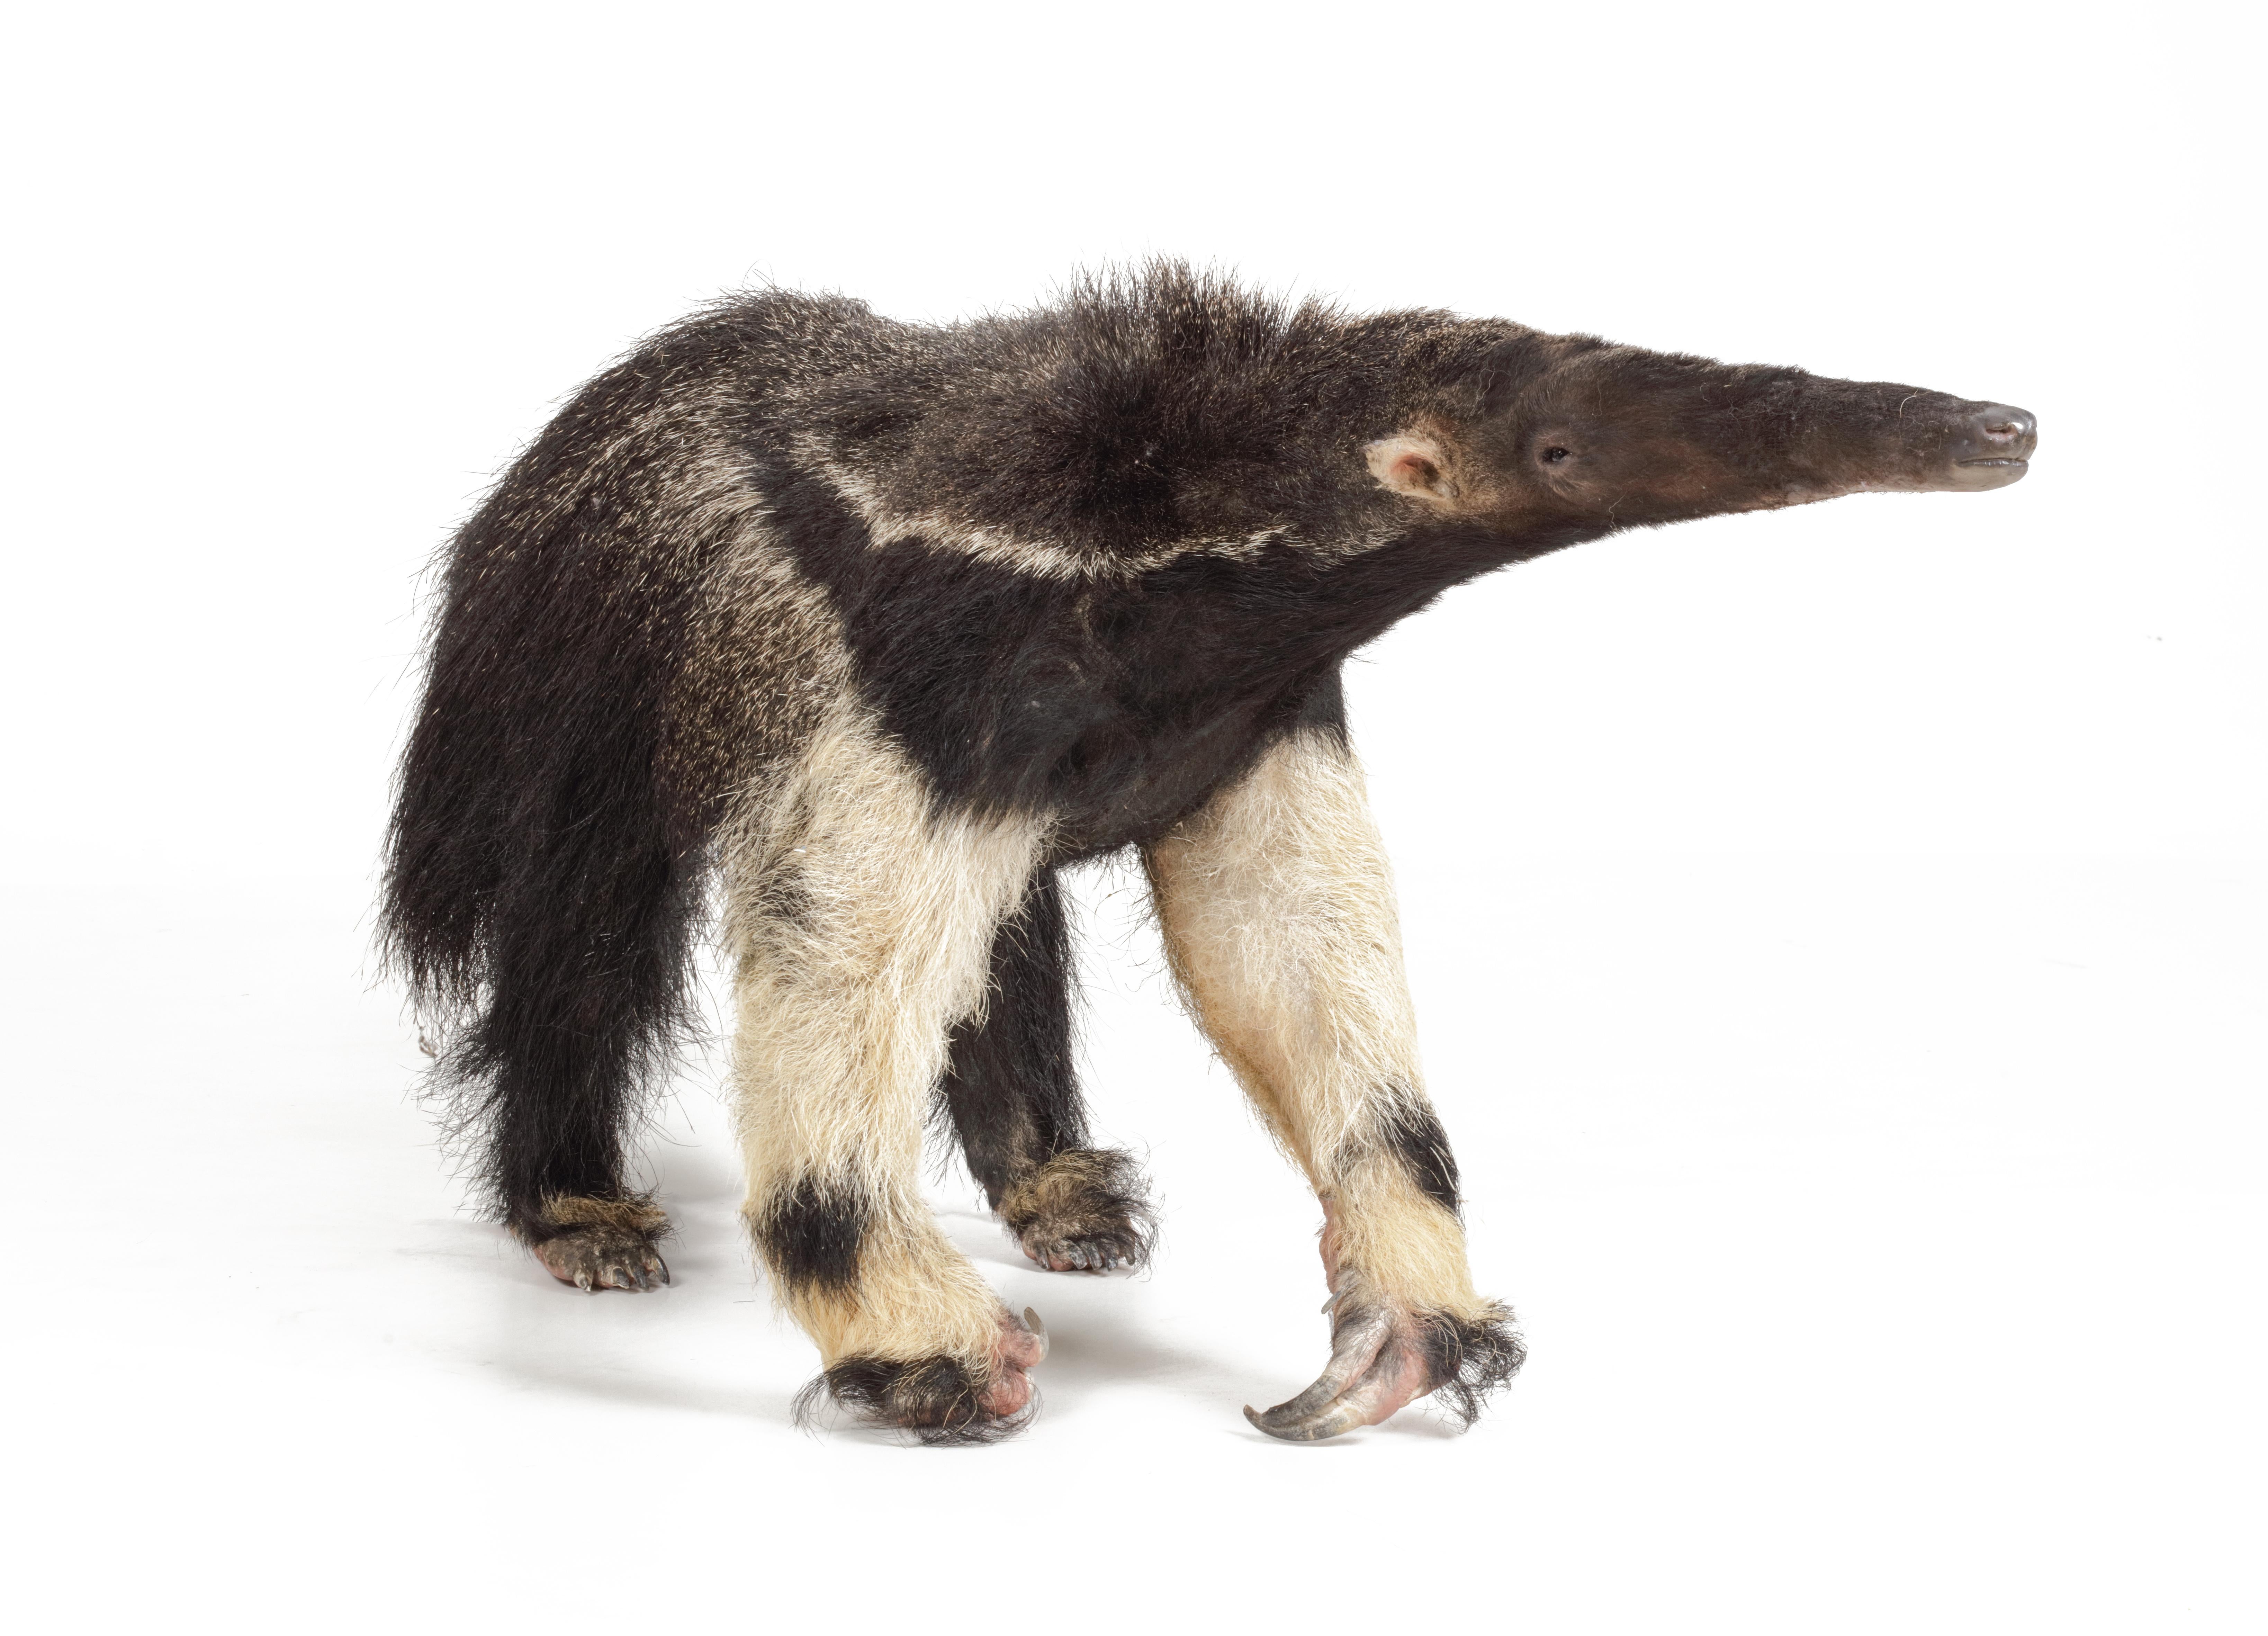 An extremely rare antique taxidermy Giant Anteater (Myrmecophaga tridactyla)

1st half 20th century
The marvellous creature in very good condition and of very fine quality, being a recently mounted antique skin.

Including a pre-convention CITES